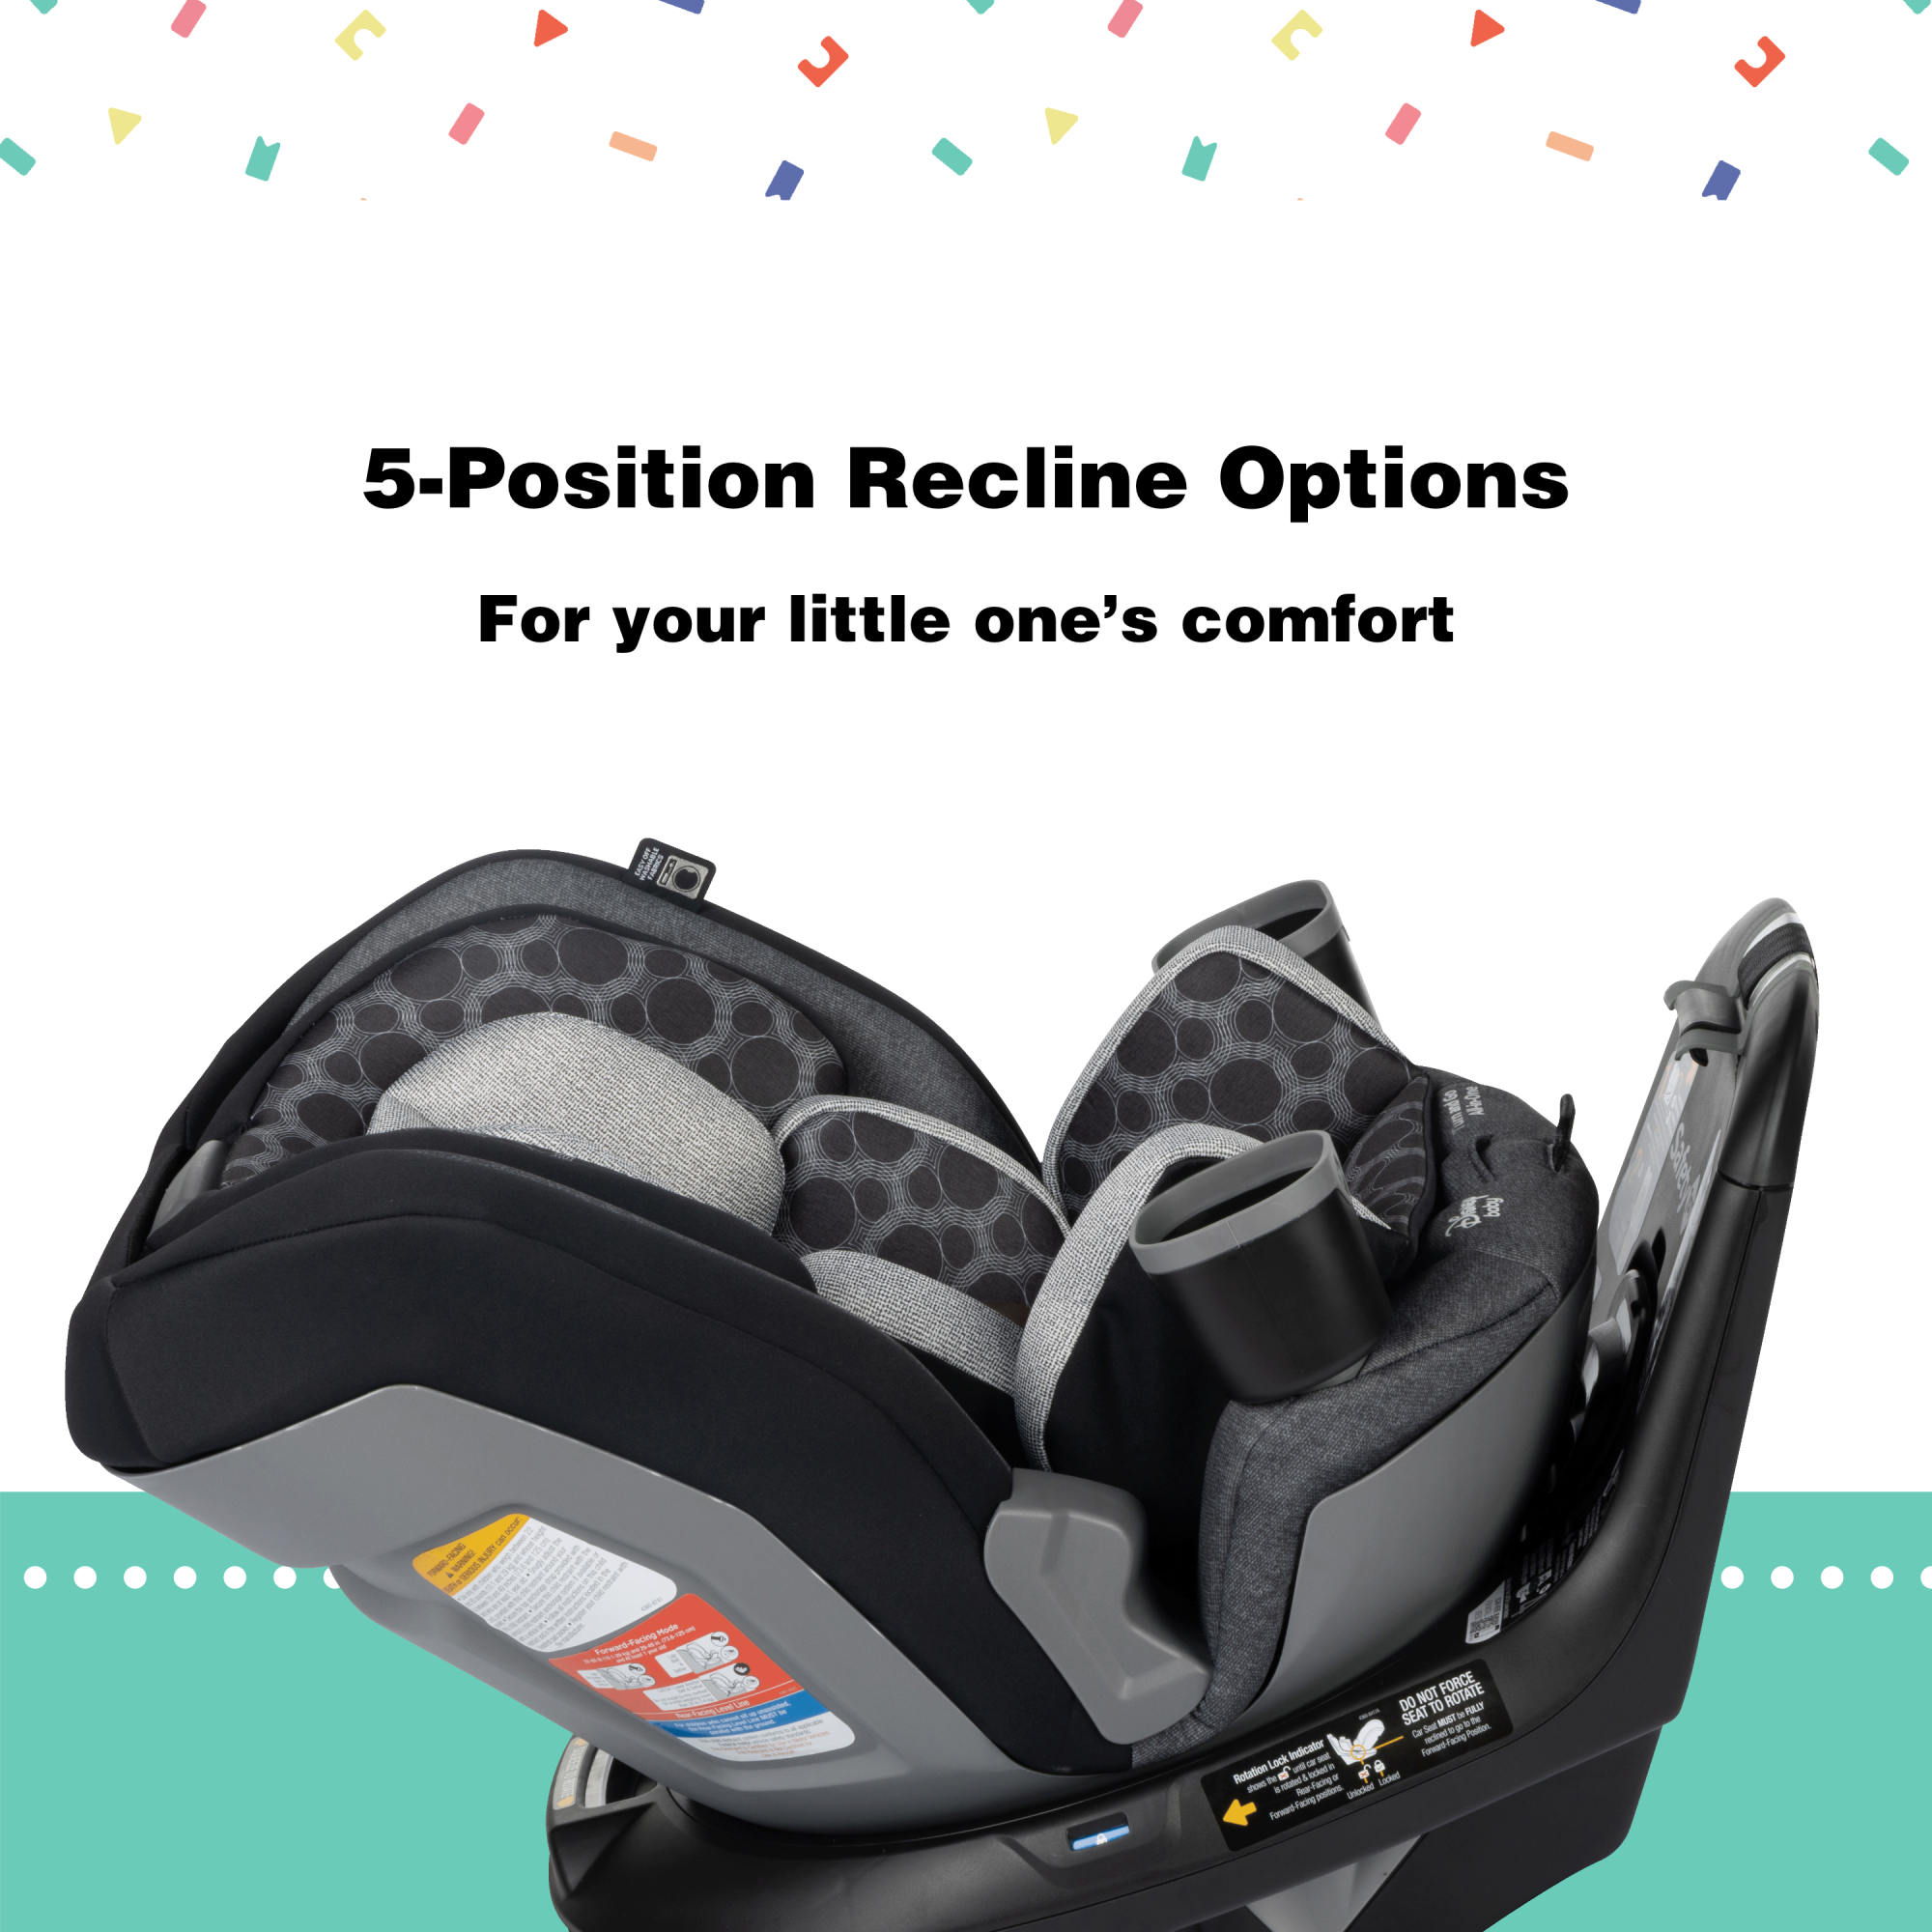 Disney Baby Turn and Go 360 Rotating All-in-One Convertible Car Seat - plush infant inserts and premium fabrics provide cushioning and support to keep baby comfortable